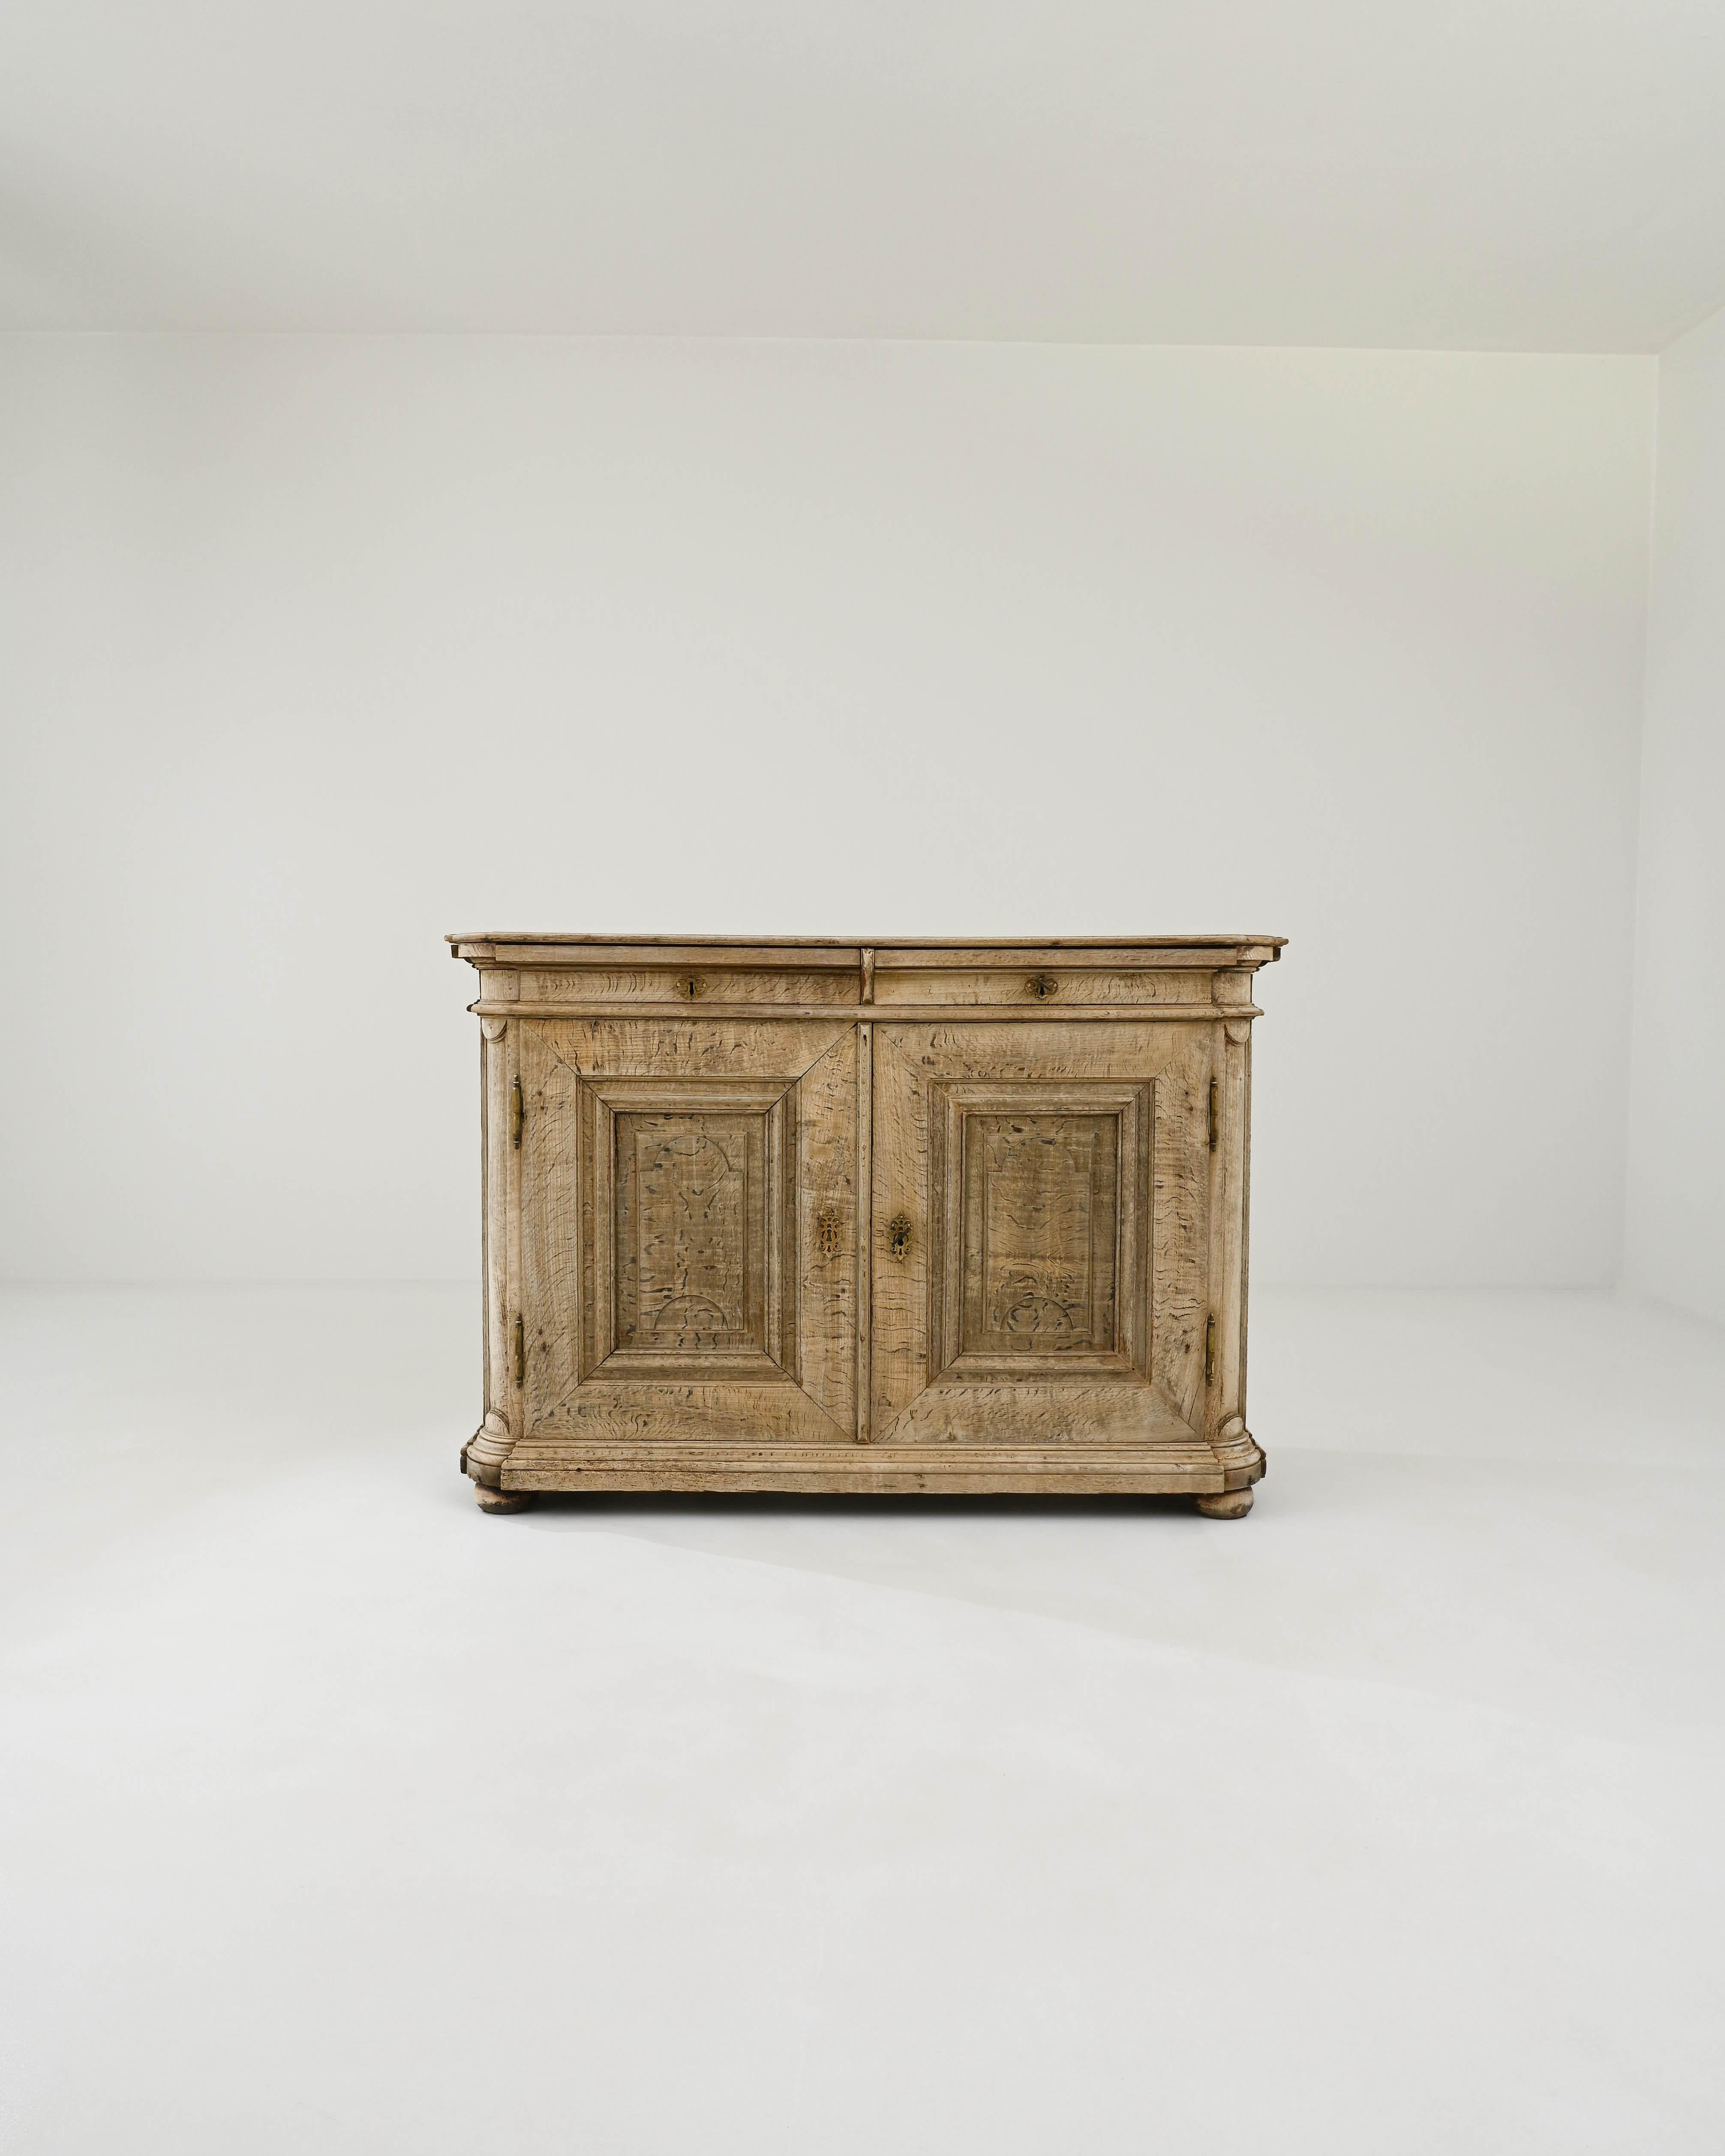 Timeless craftsmanship and the beautiful finish of the natural oak make this antique buffet a find to treasure. Hand-built in France in the 1800s, discreet decorative accents bring personality to the spacious cabinet. The half-moon details of the